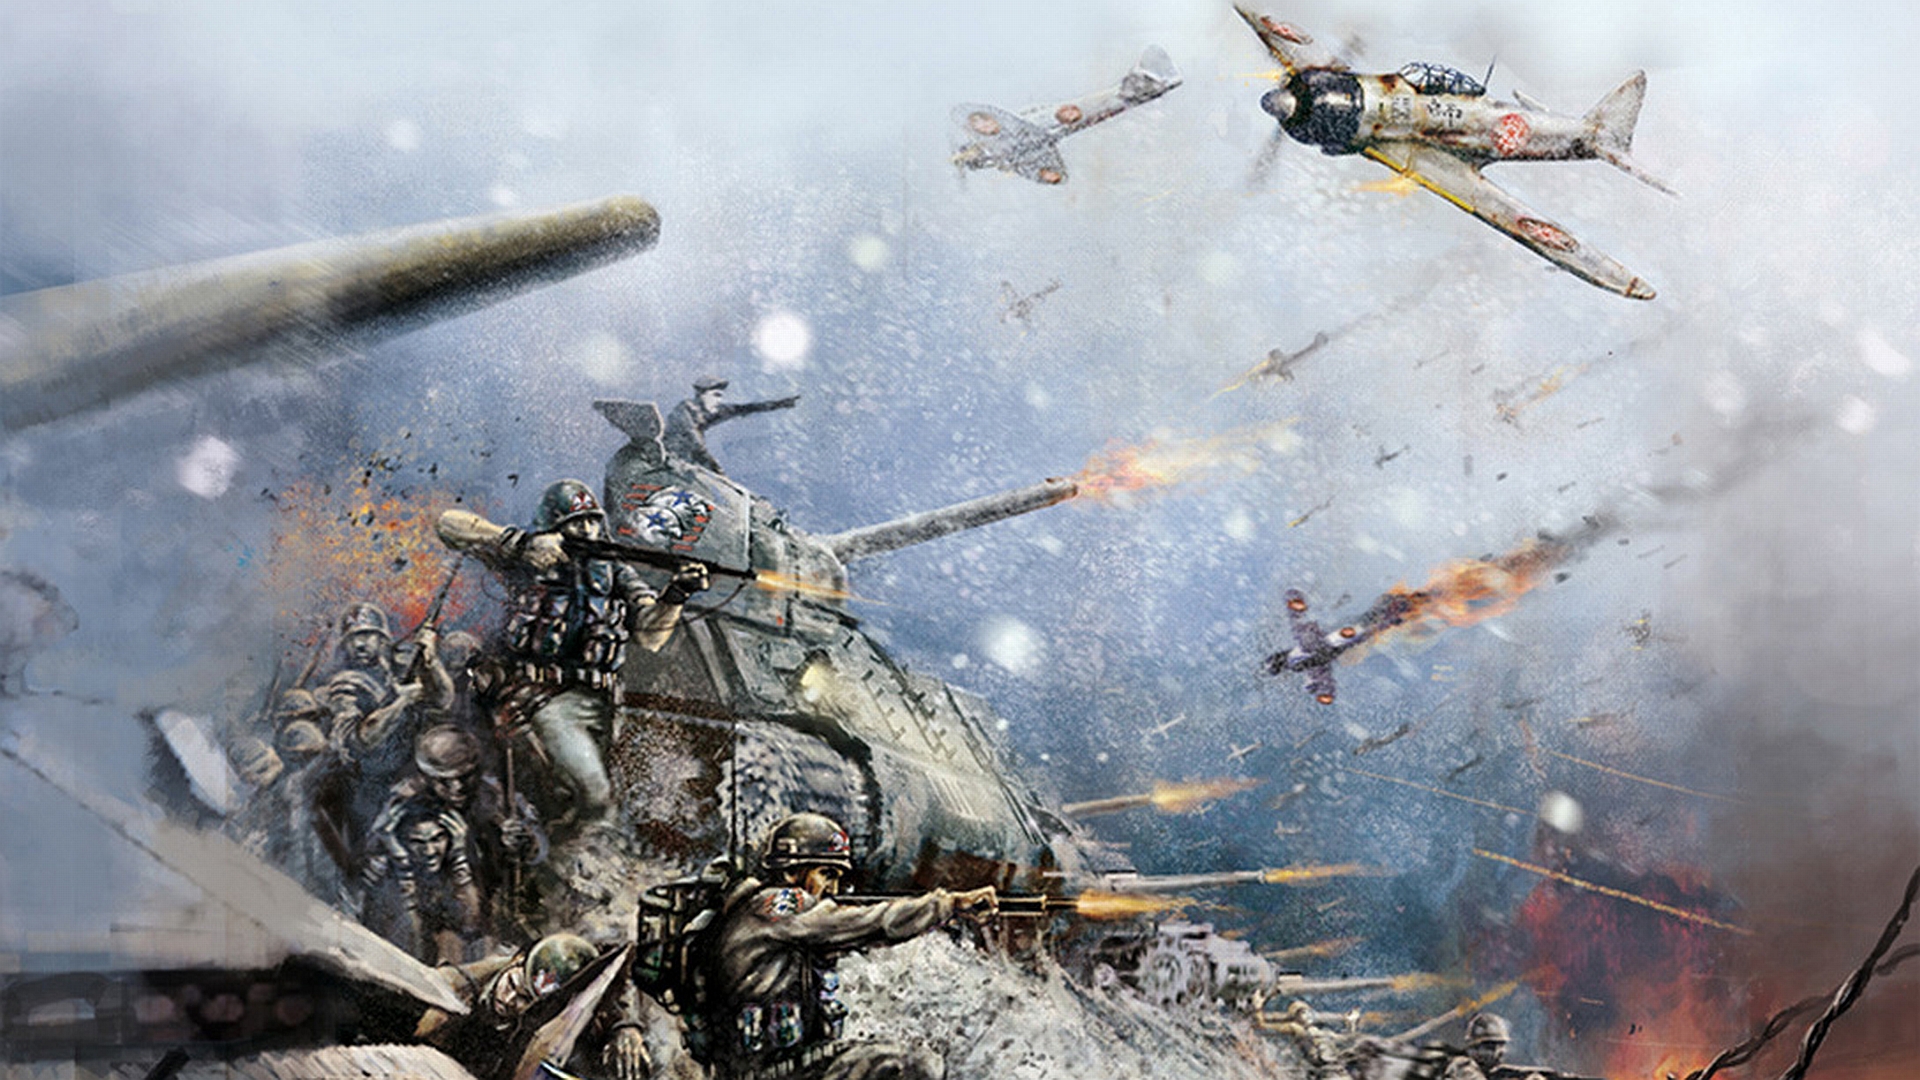 Military battle scene wallpaper. Powerful soldiers engage in intense combat.